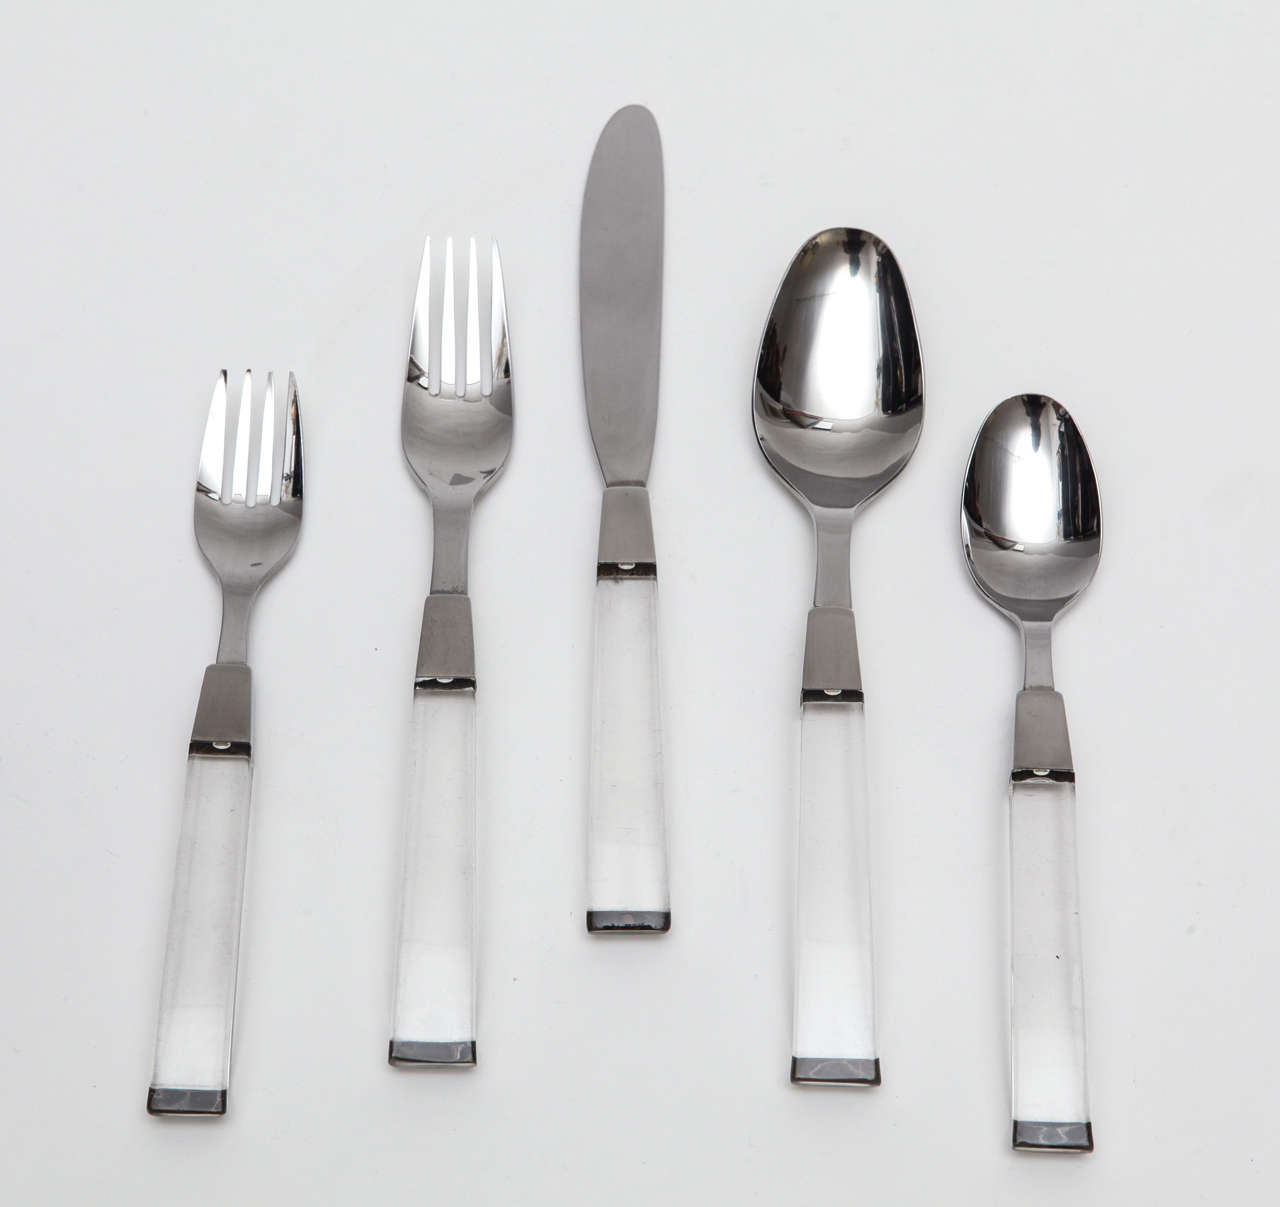 A fantastic set of Lucite handled stainless steel flatware that includes full service for sixteen that is in very good condition. There are a total of 257 pieces, some of which show crazing to the handles, which creates a interesting contrast to the